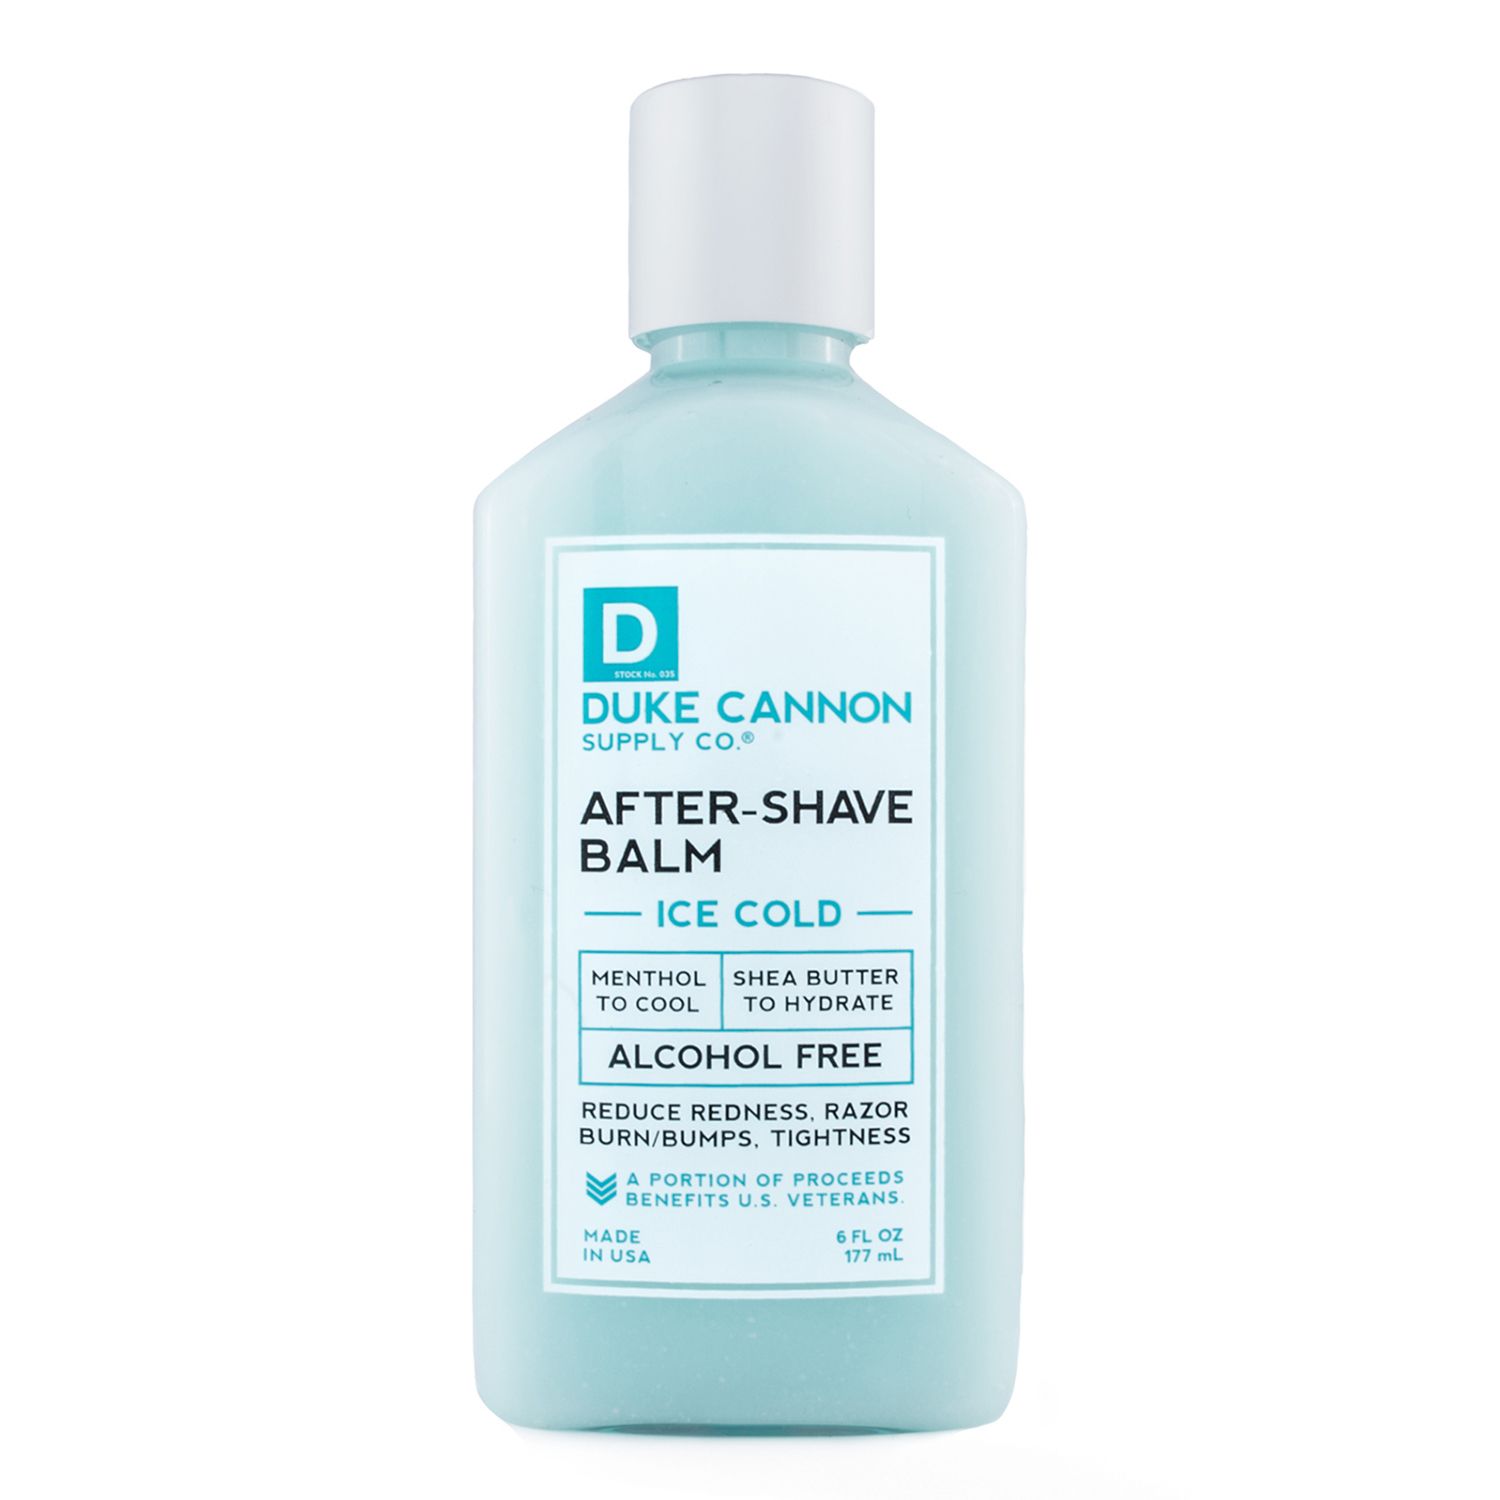 Image for Duke Cannon Supply Co. Cooling After-Shave Balm at Kohl's.